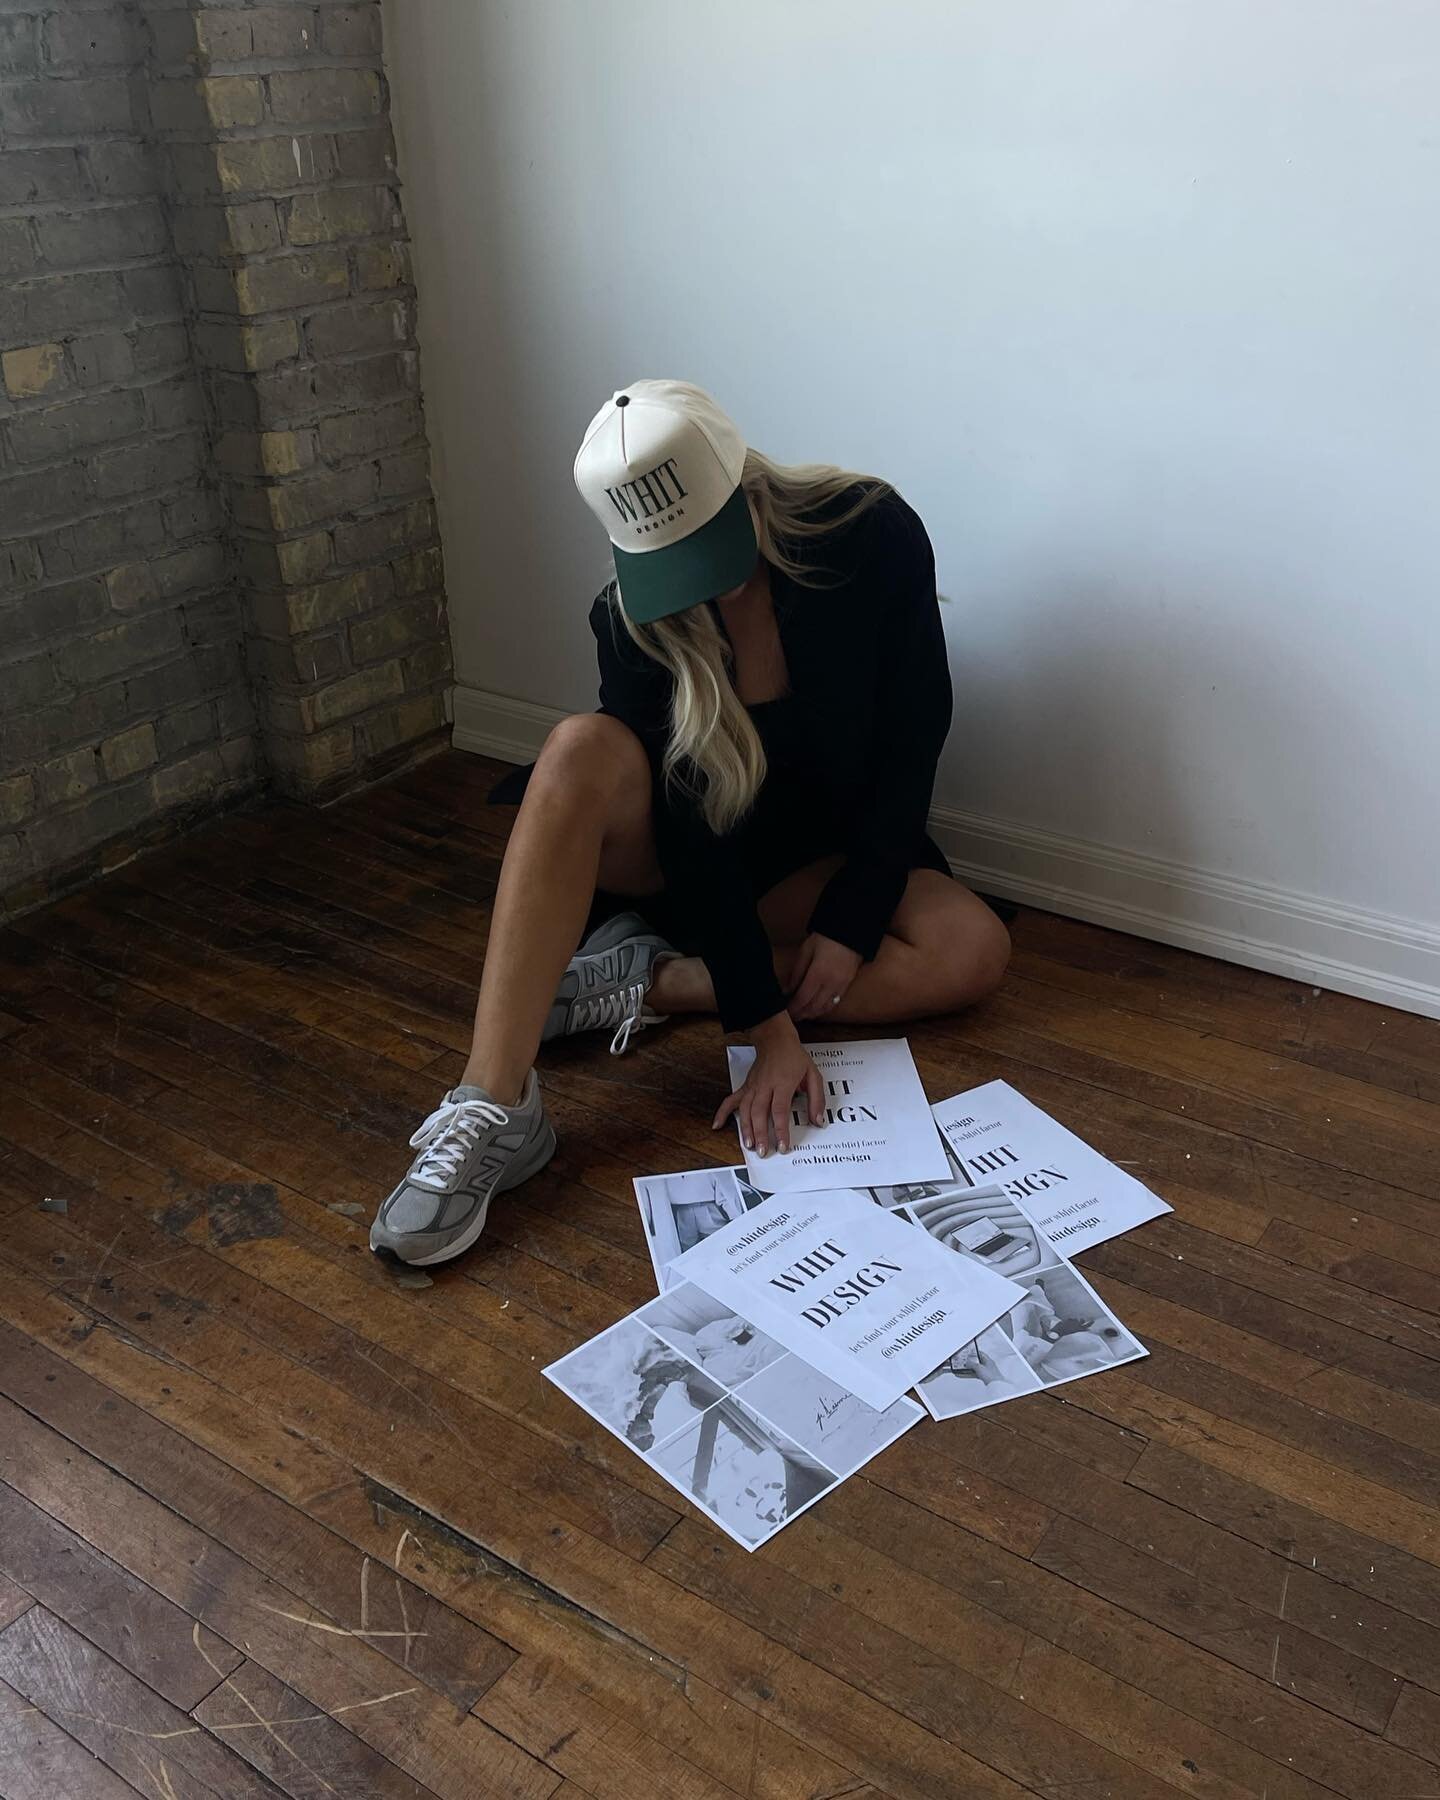 MEET THE FOUNDER 🤎

@whitney.schutt is a dynamic and enthusiastic individual fueled by a deep entrepreneurial drive. Her natural sense of creativity and a keen eye for design + trend led her to establish Whit Design, a boutique Creative Digital Agen